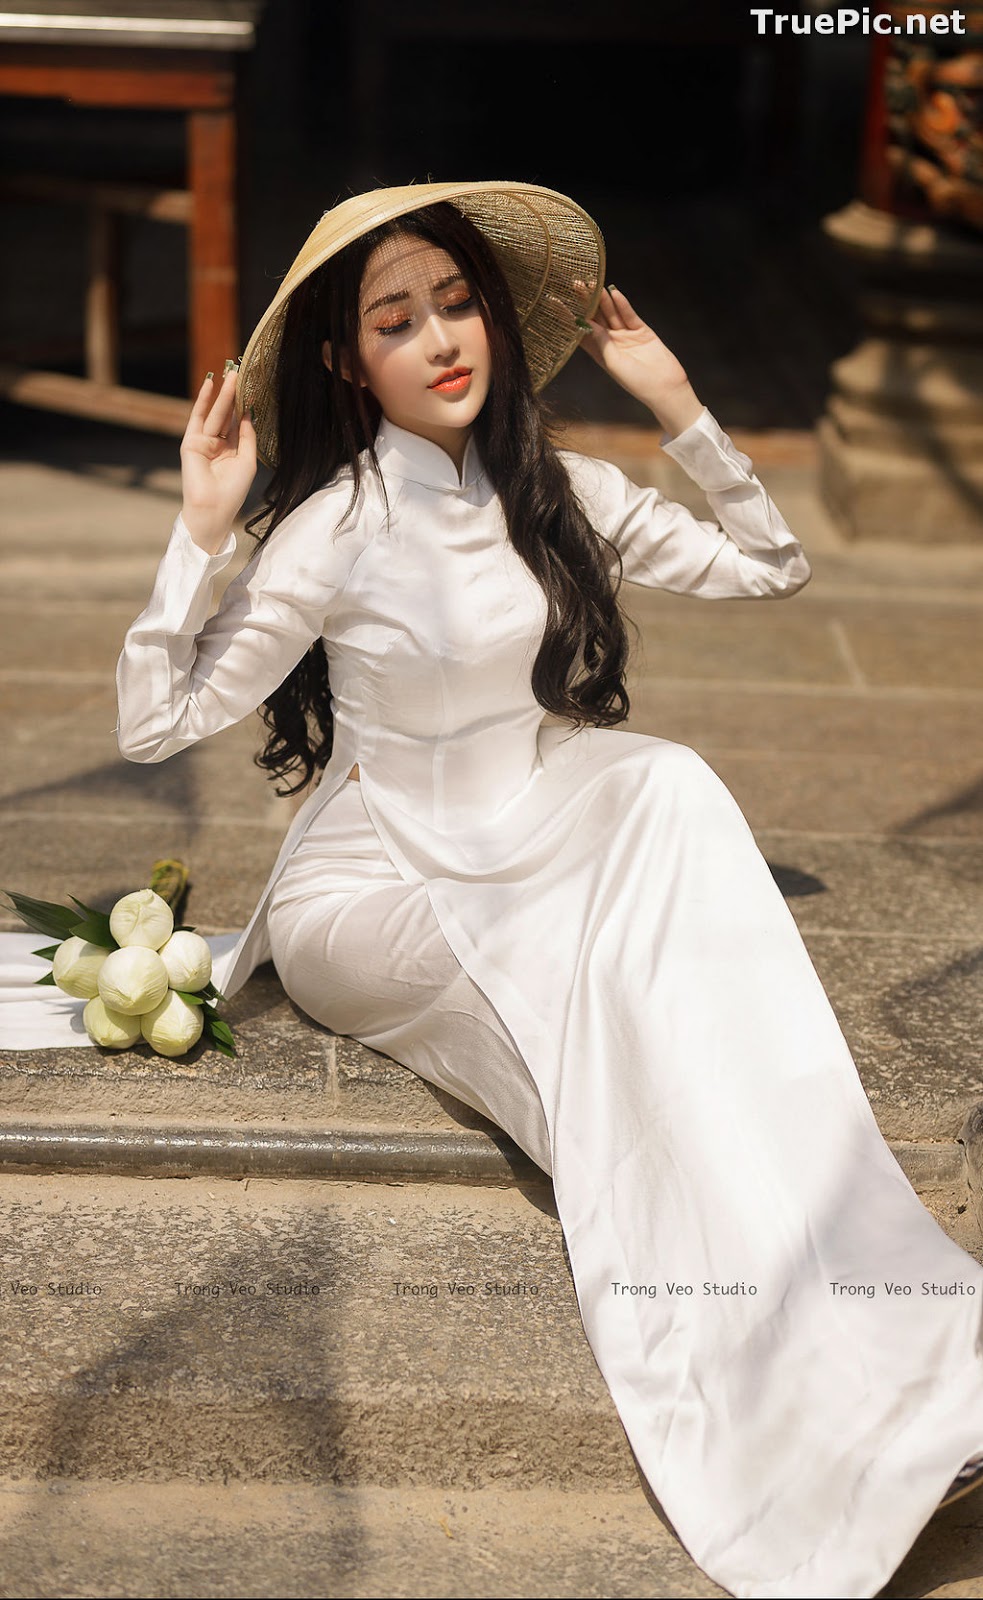 Image The Beauty of Vietnamese Girls with Traditional Dress (Ao Dai) #2 - TruePic.net - Picture-22